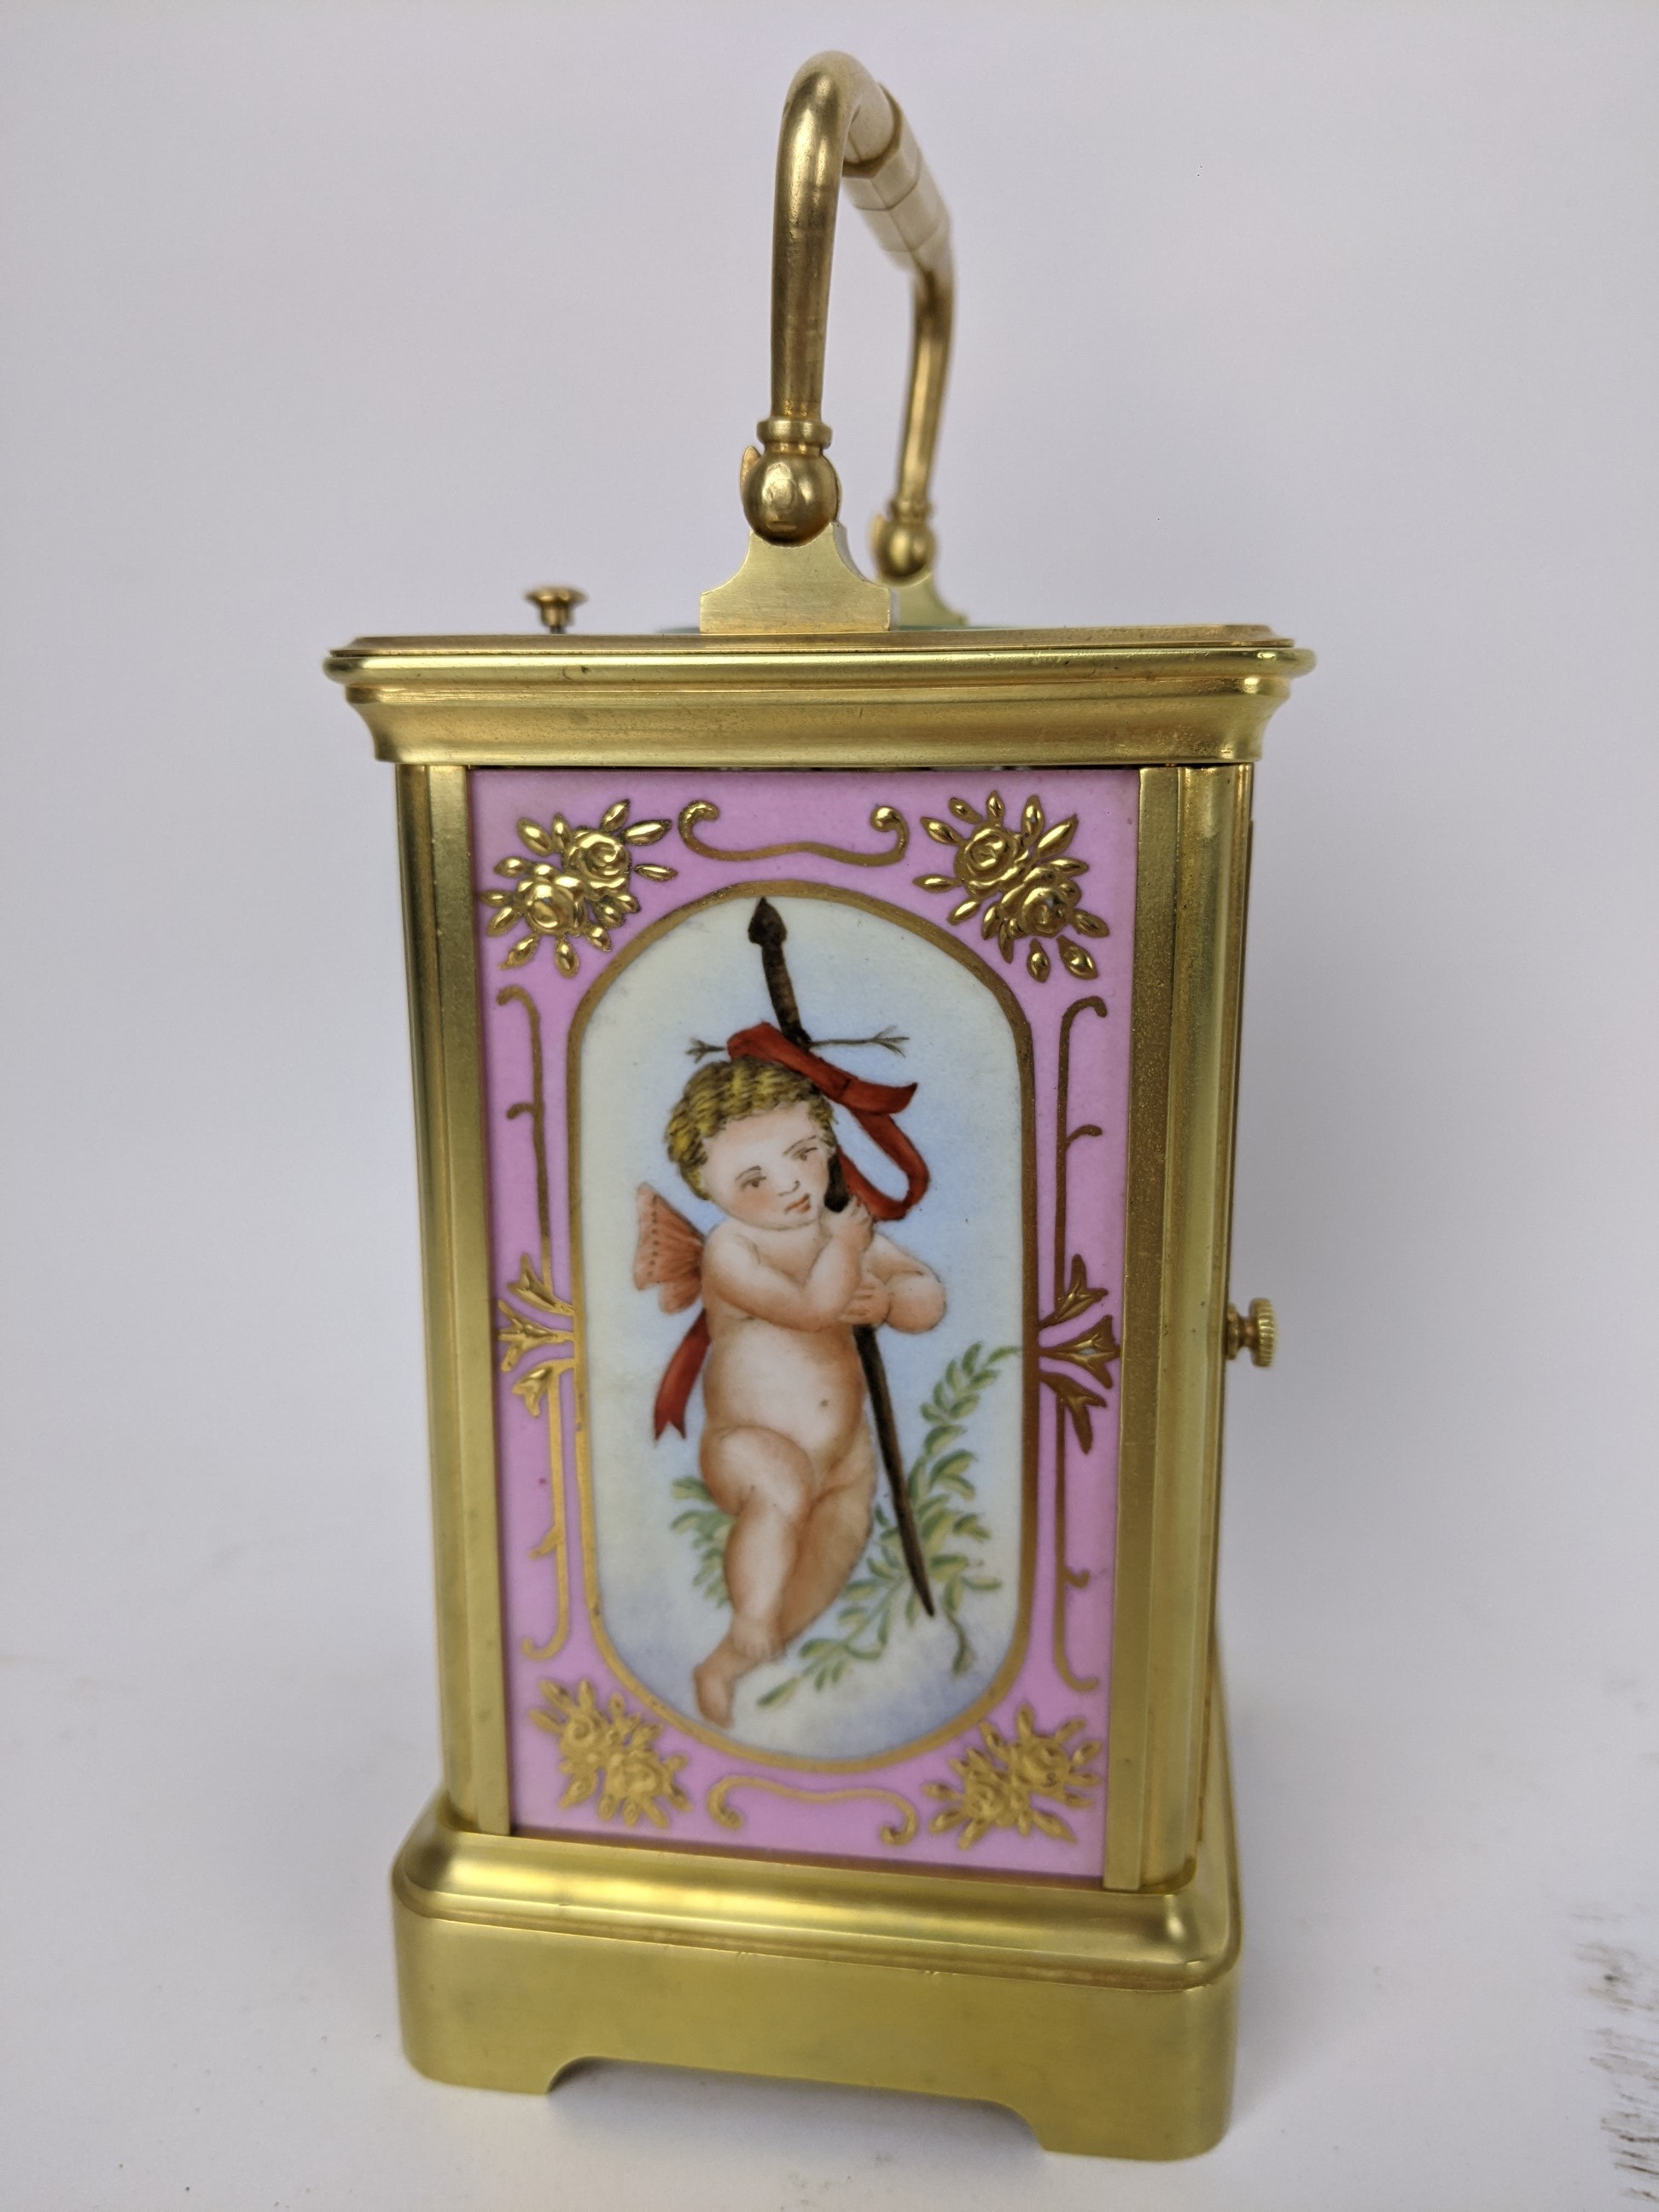 An early 20th century repeater carriage clock, having Sevres style porcelain panels decorated with - Image 2 of 6